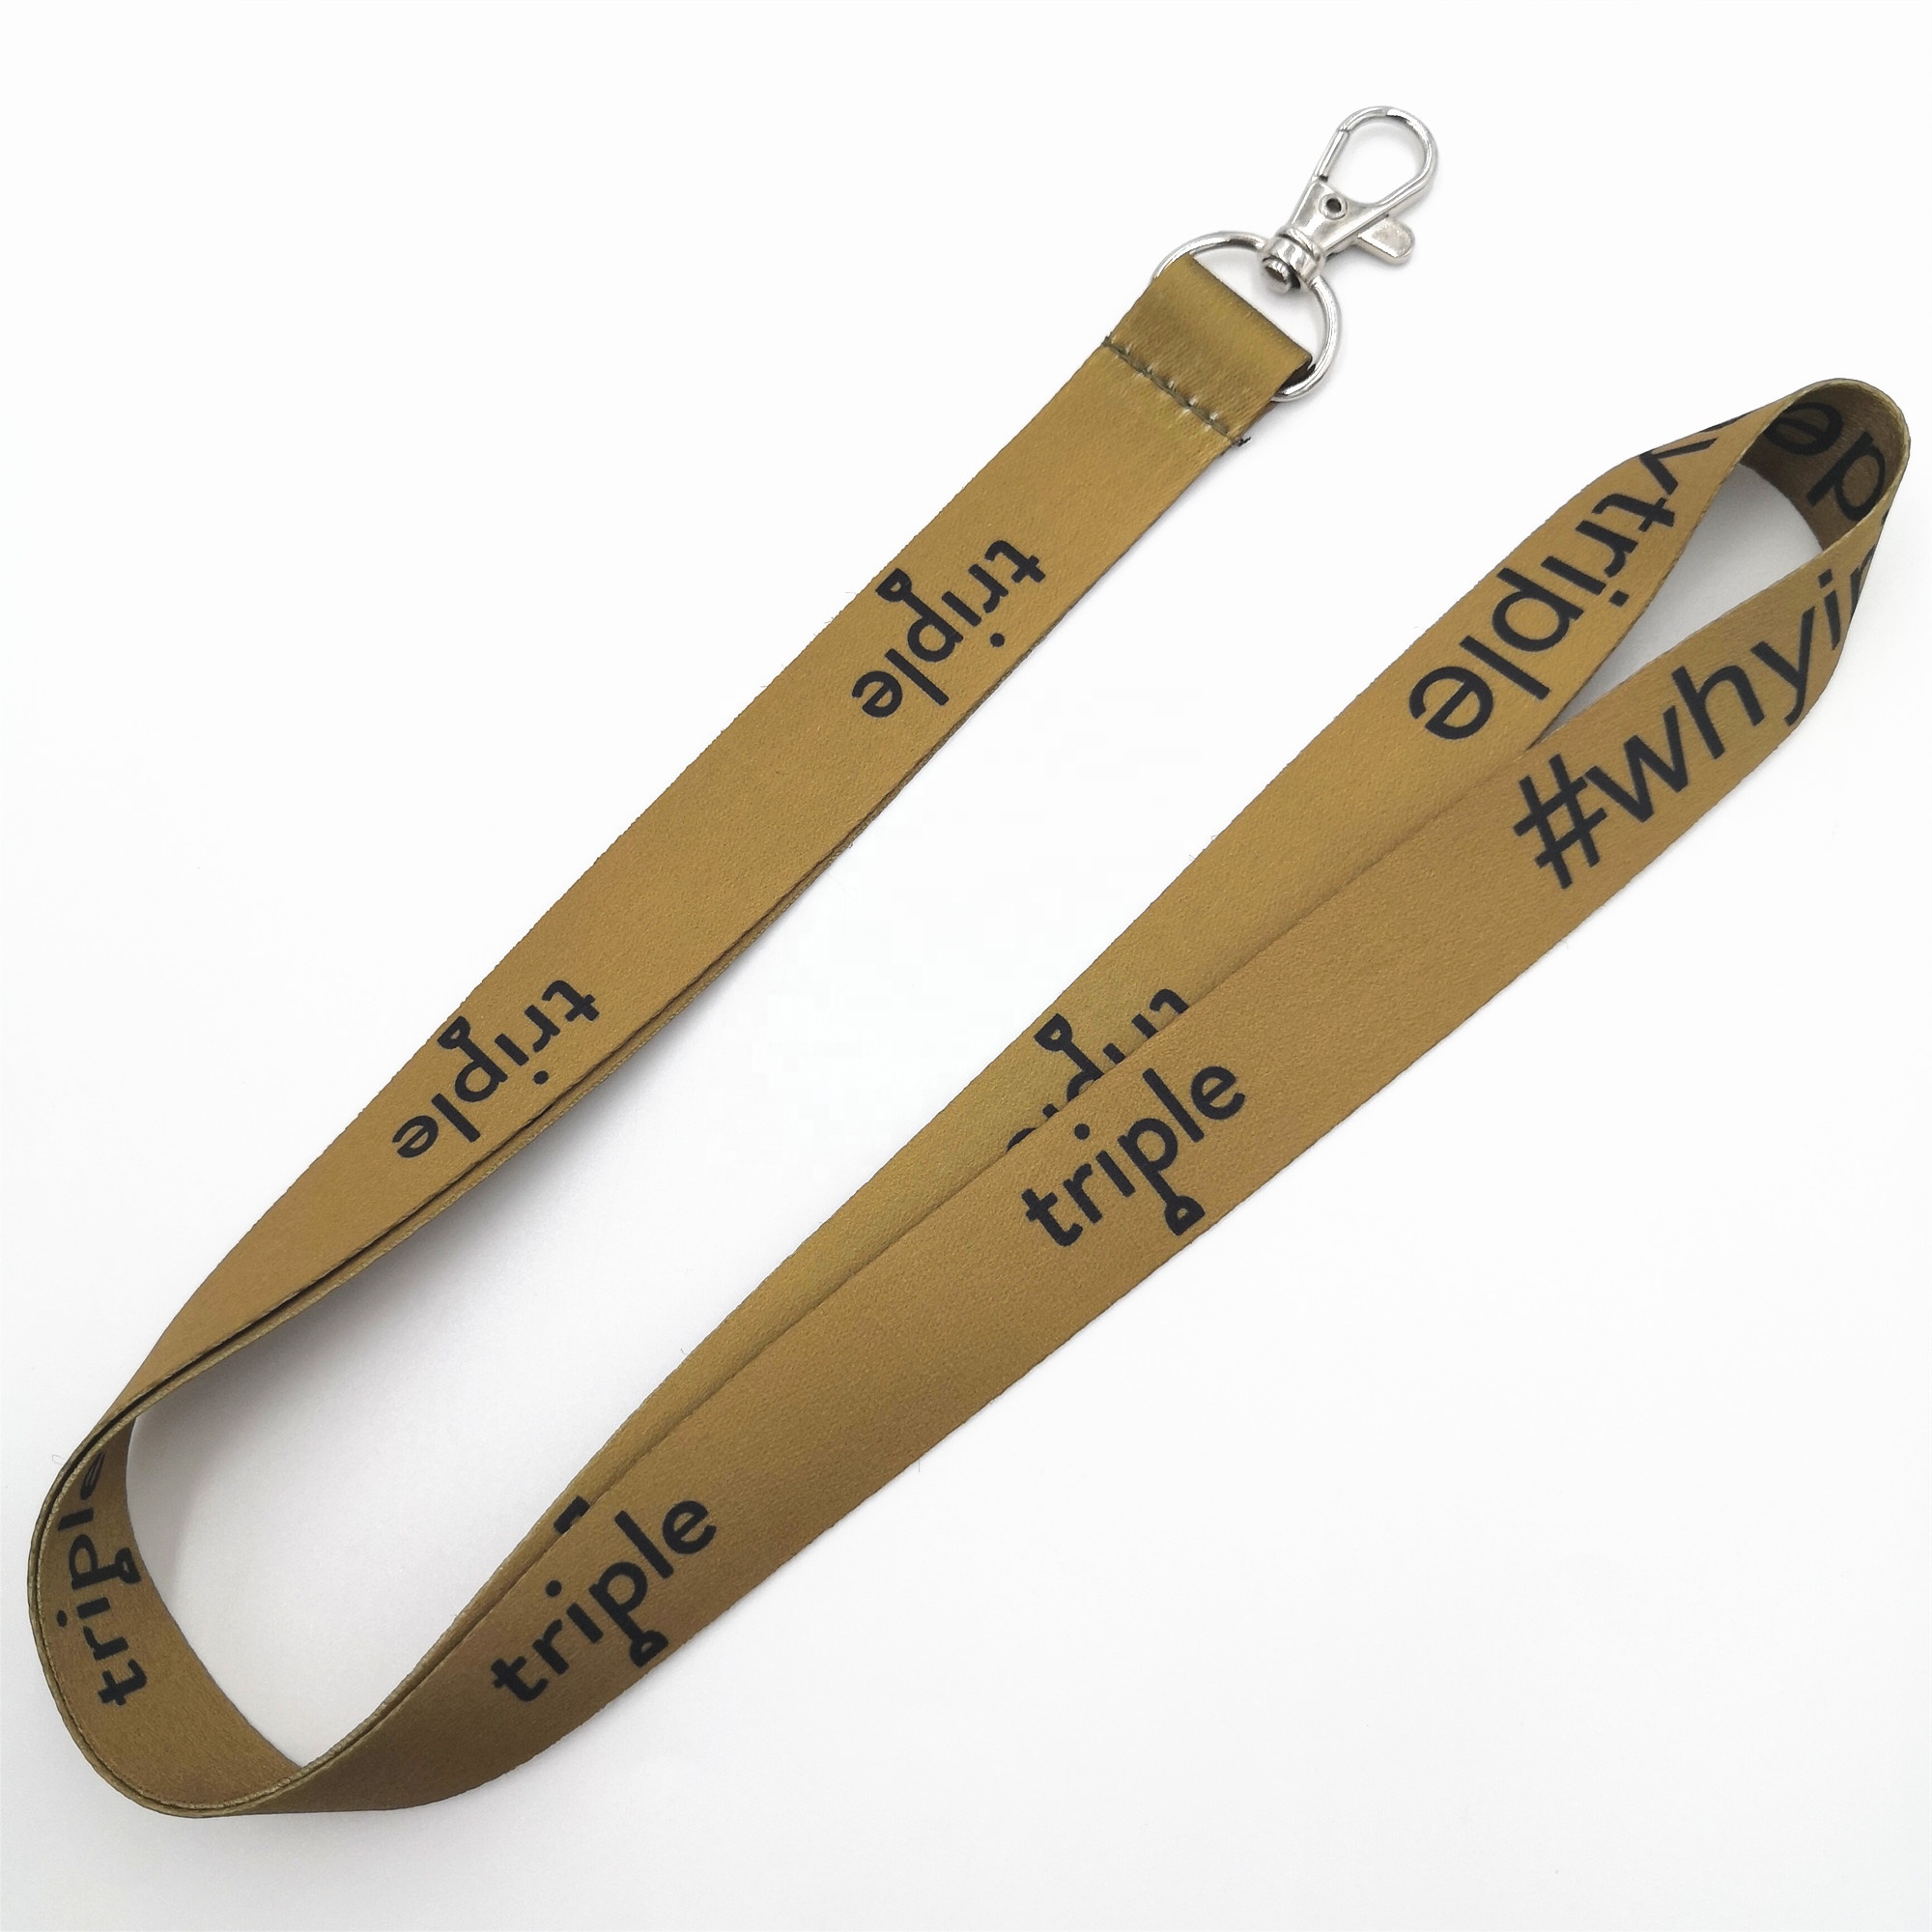 High Quality Heat Transfer Lanyards – New style most popular design custom printed polyester heat transfer lanyard – Bison